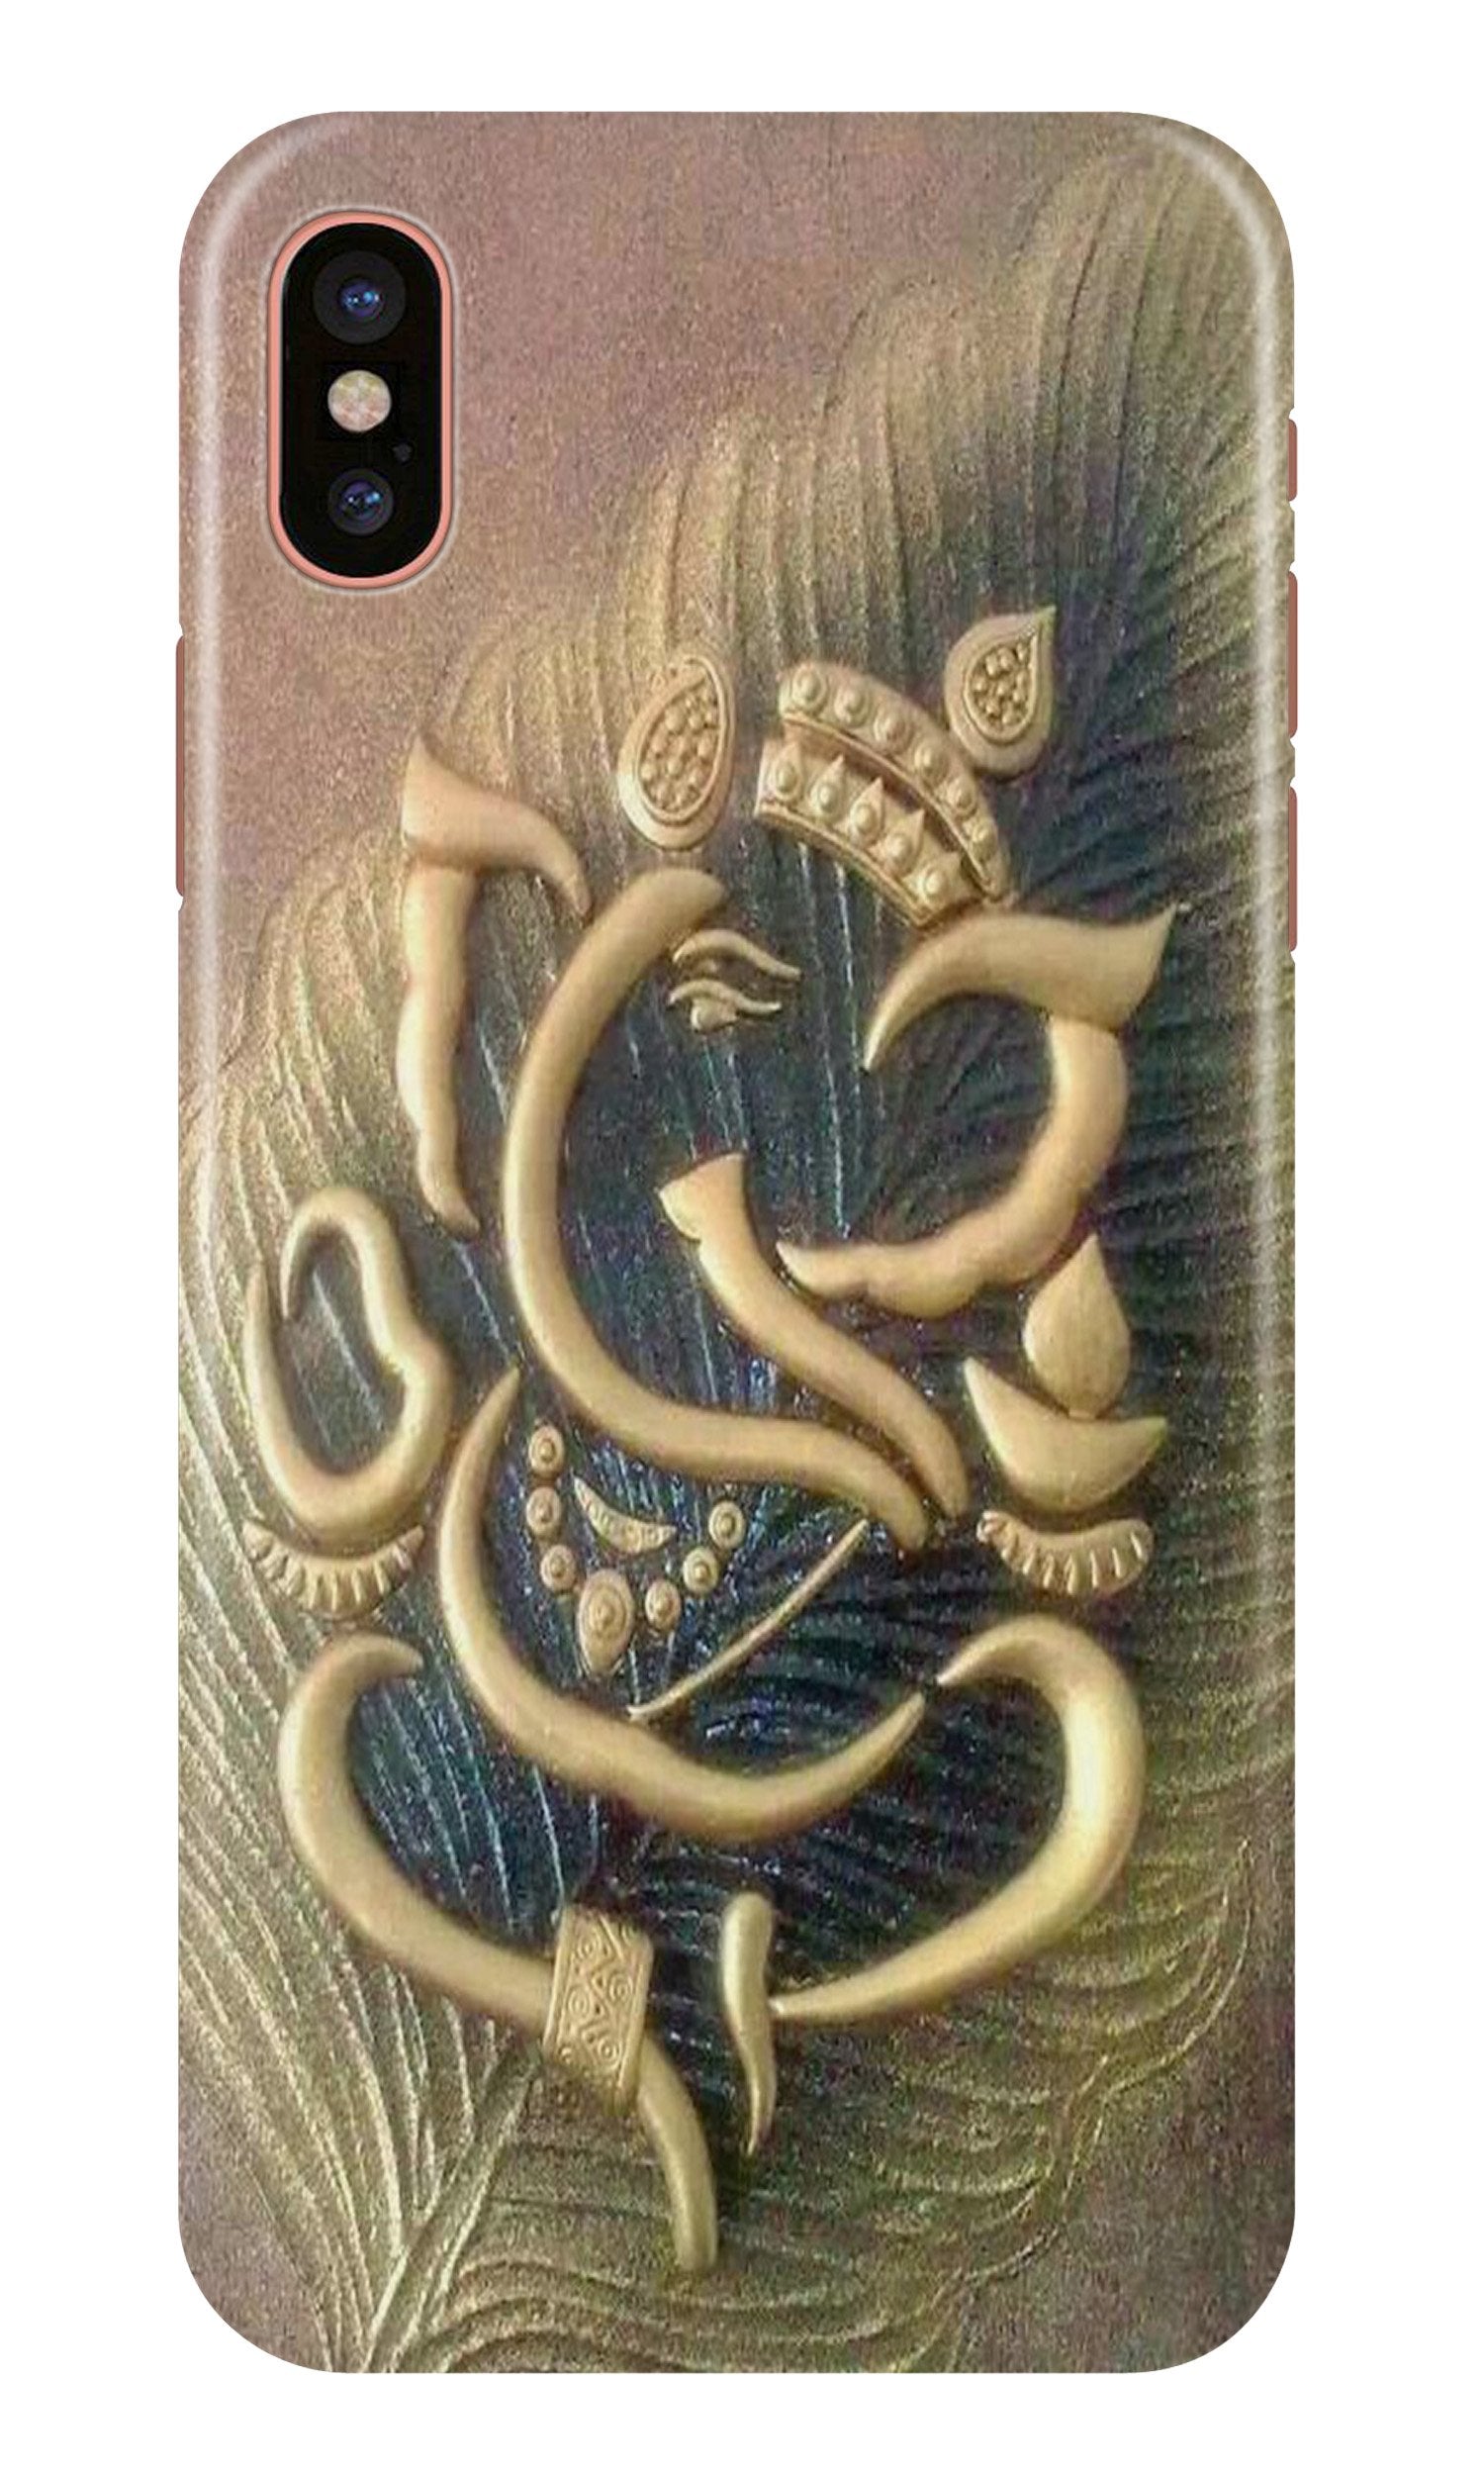 Lord Ganesha Case for iPhone X